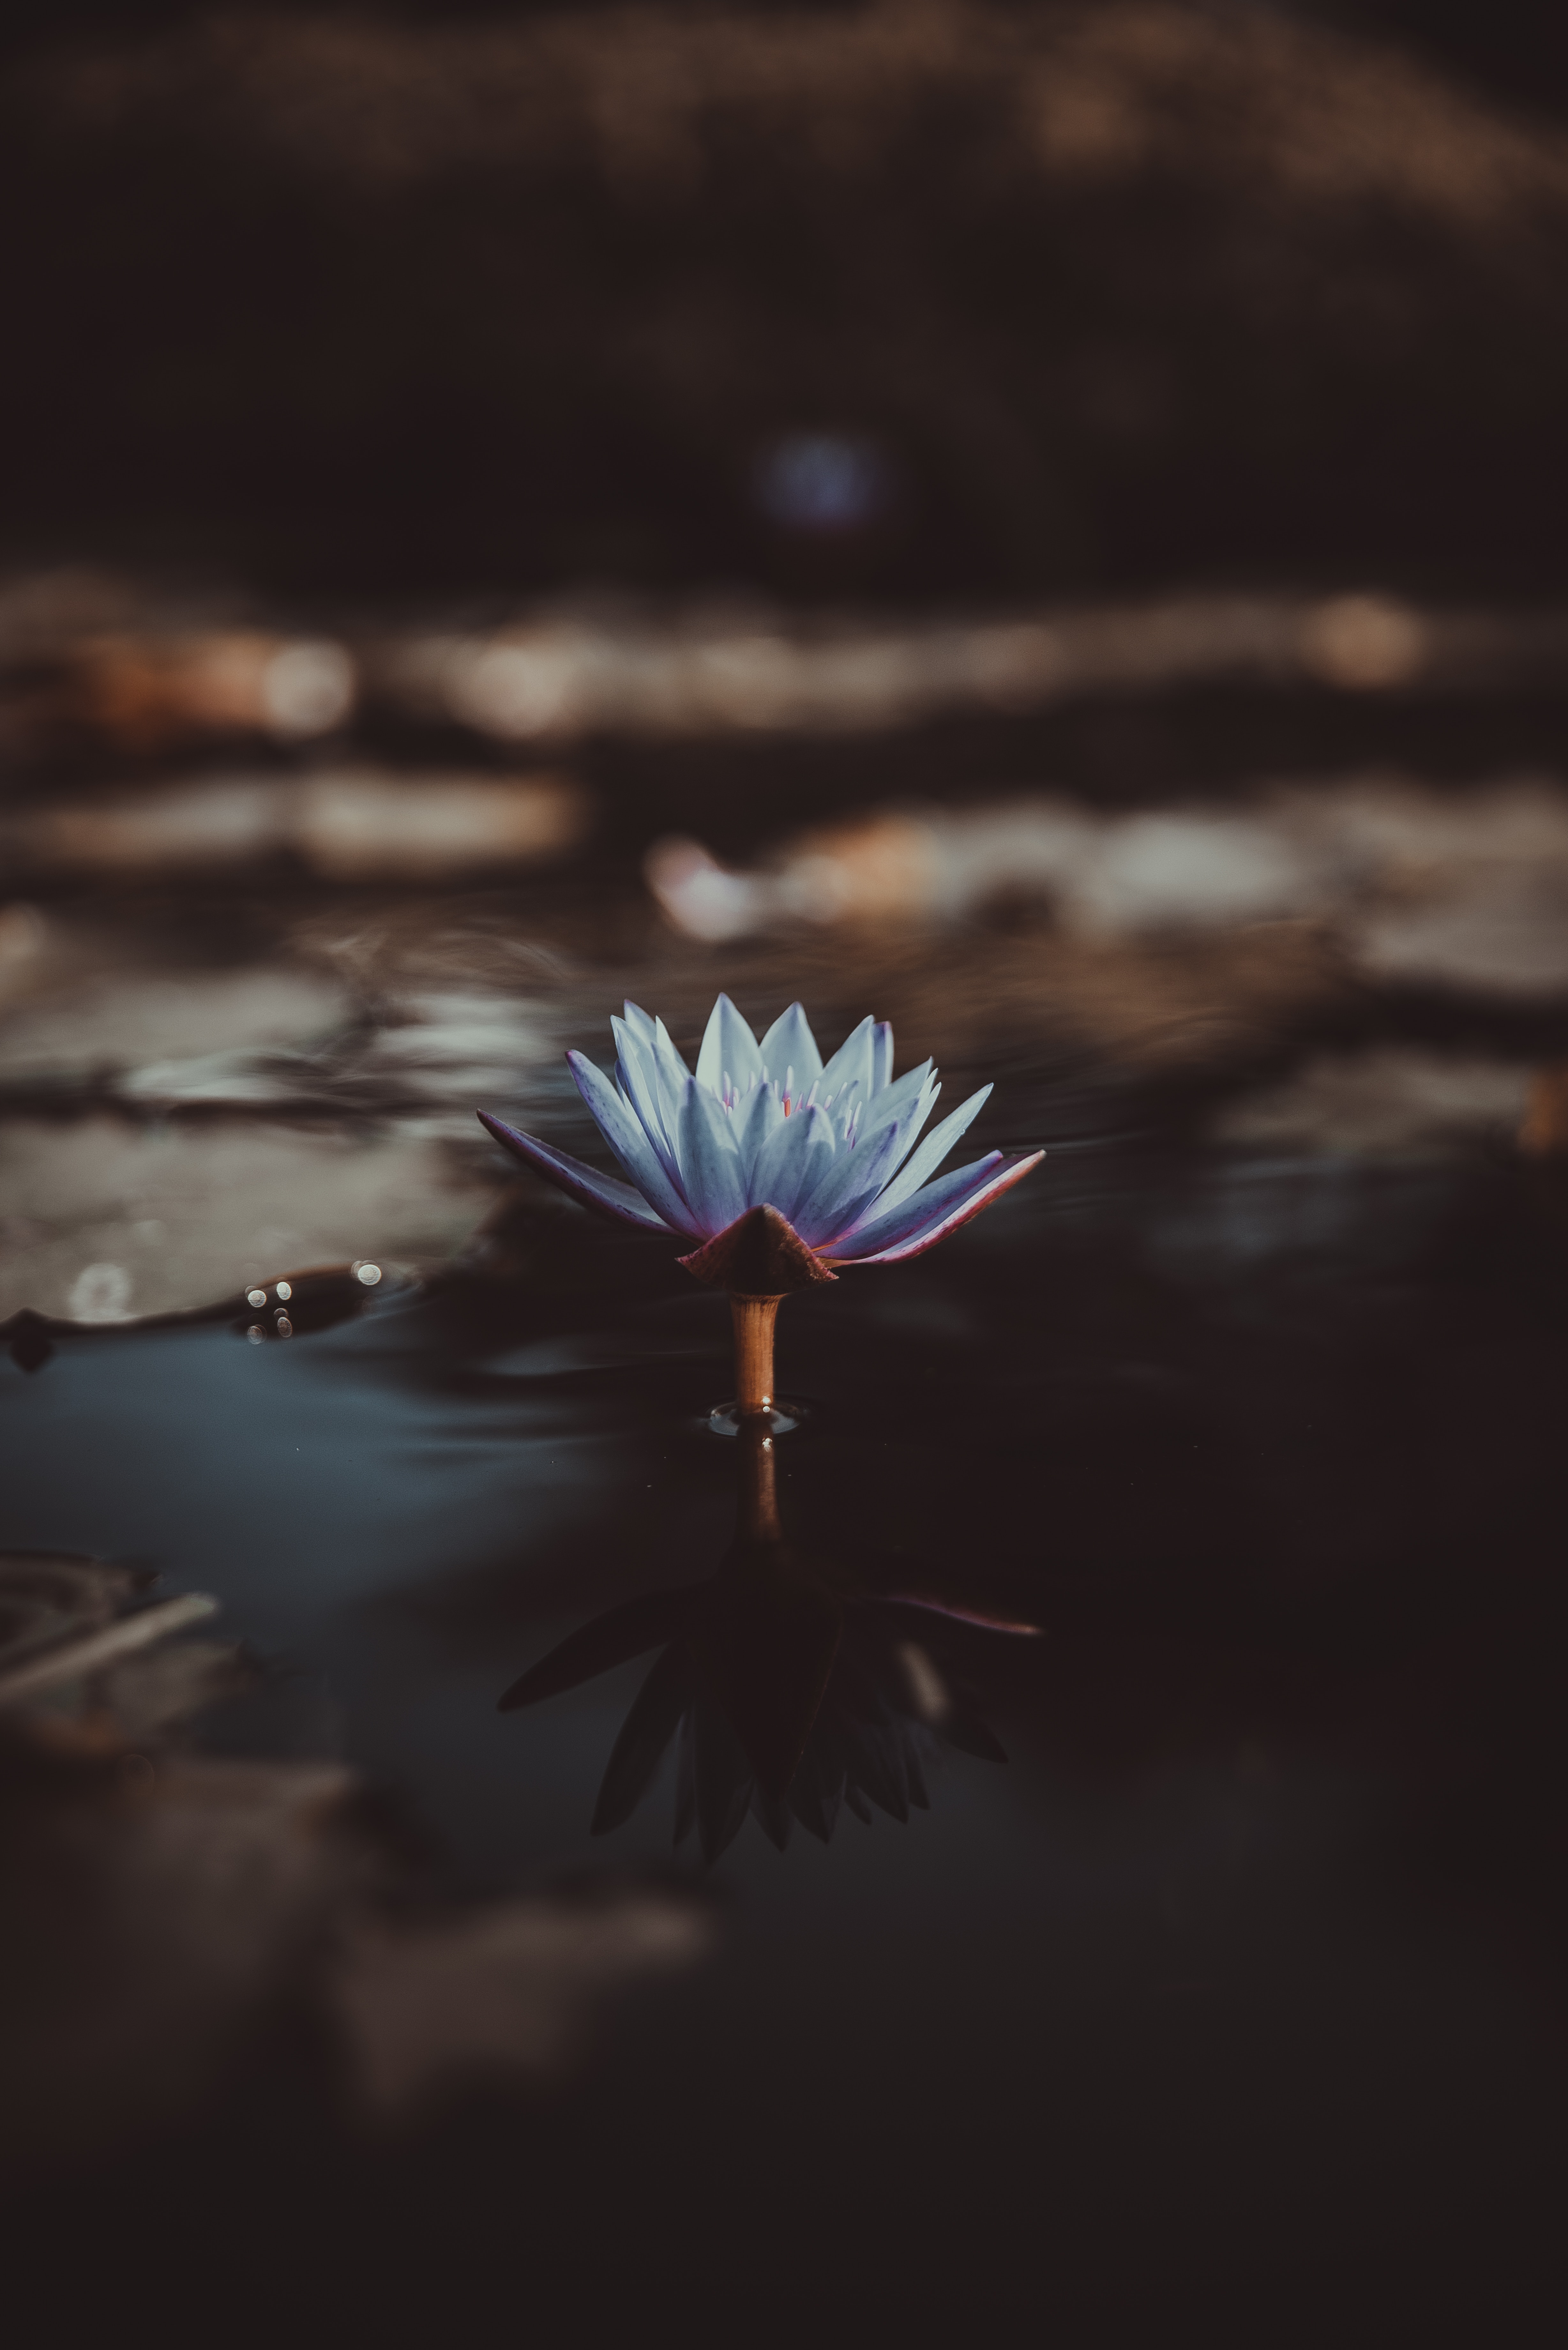 water lily, water, flower, flowers, blur, smooth, nymphea, nymphe wallpaper for mobile